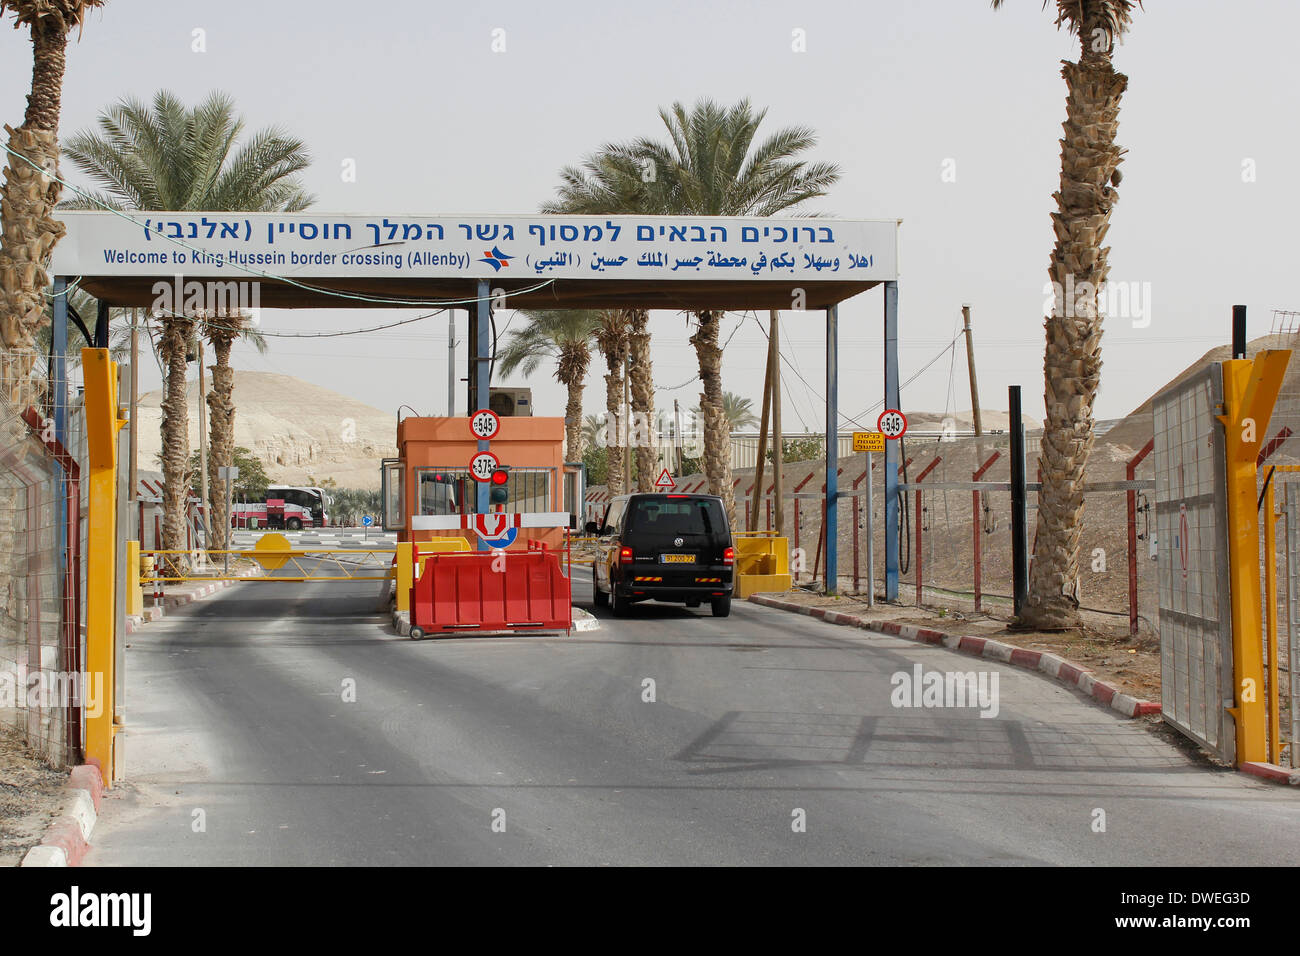 A car drives through Israeli checkpoint before crossing into Jordan in  Allenby Bridge also known as King Hussein border crossing in the Jordan  valley. Israel Stock Photo - Alamy